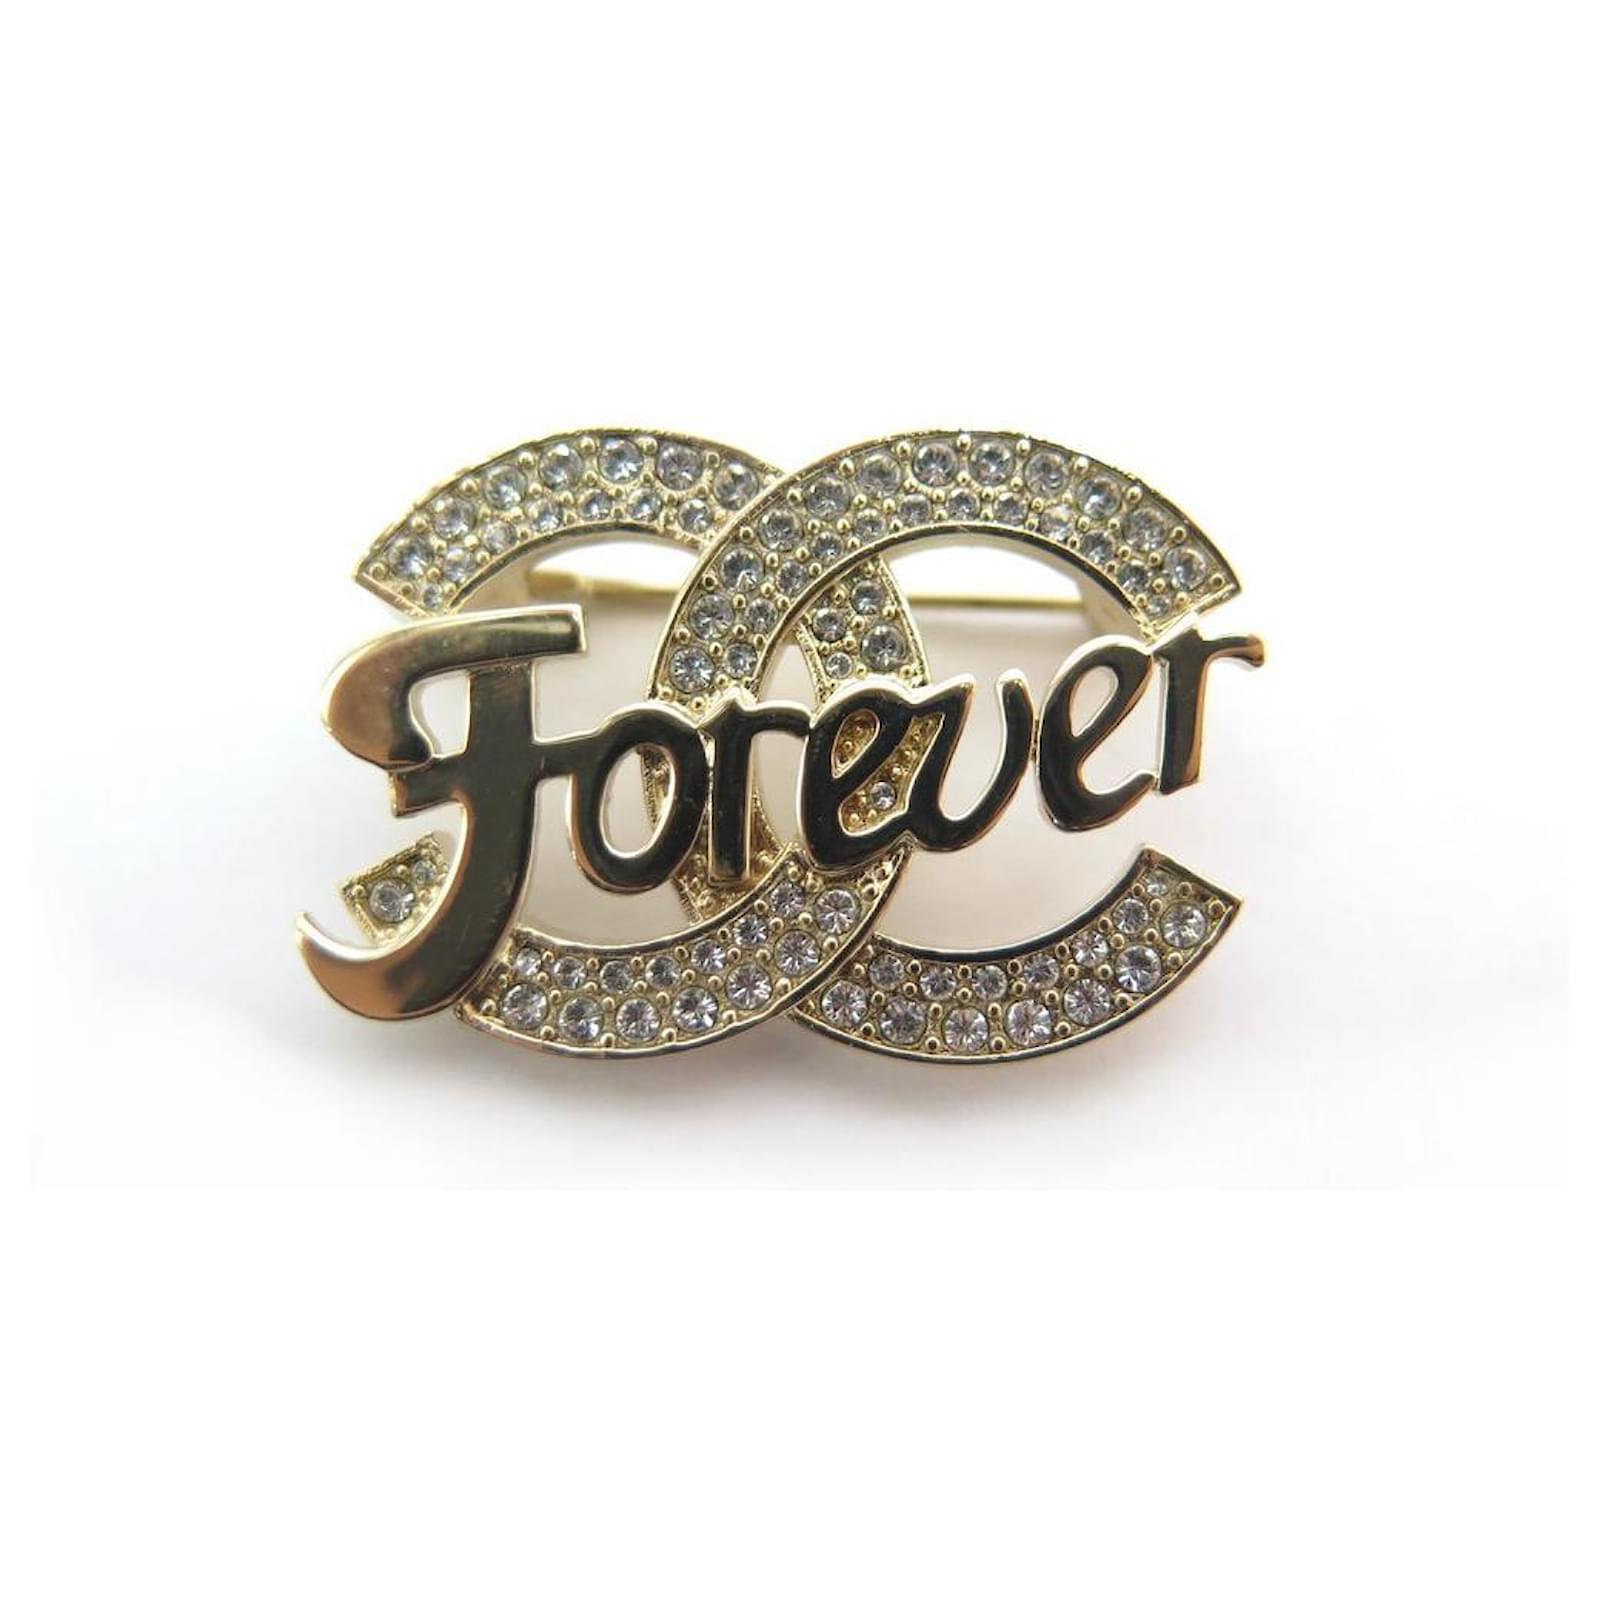 Other jewelry NEW CHANEL LOGO CC FOREVER BROOCH IN GOLDEN METAL